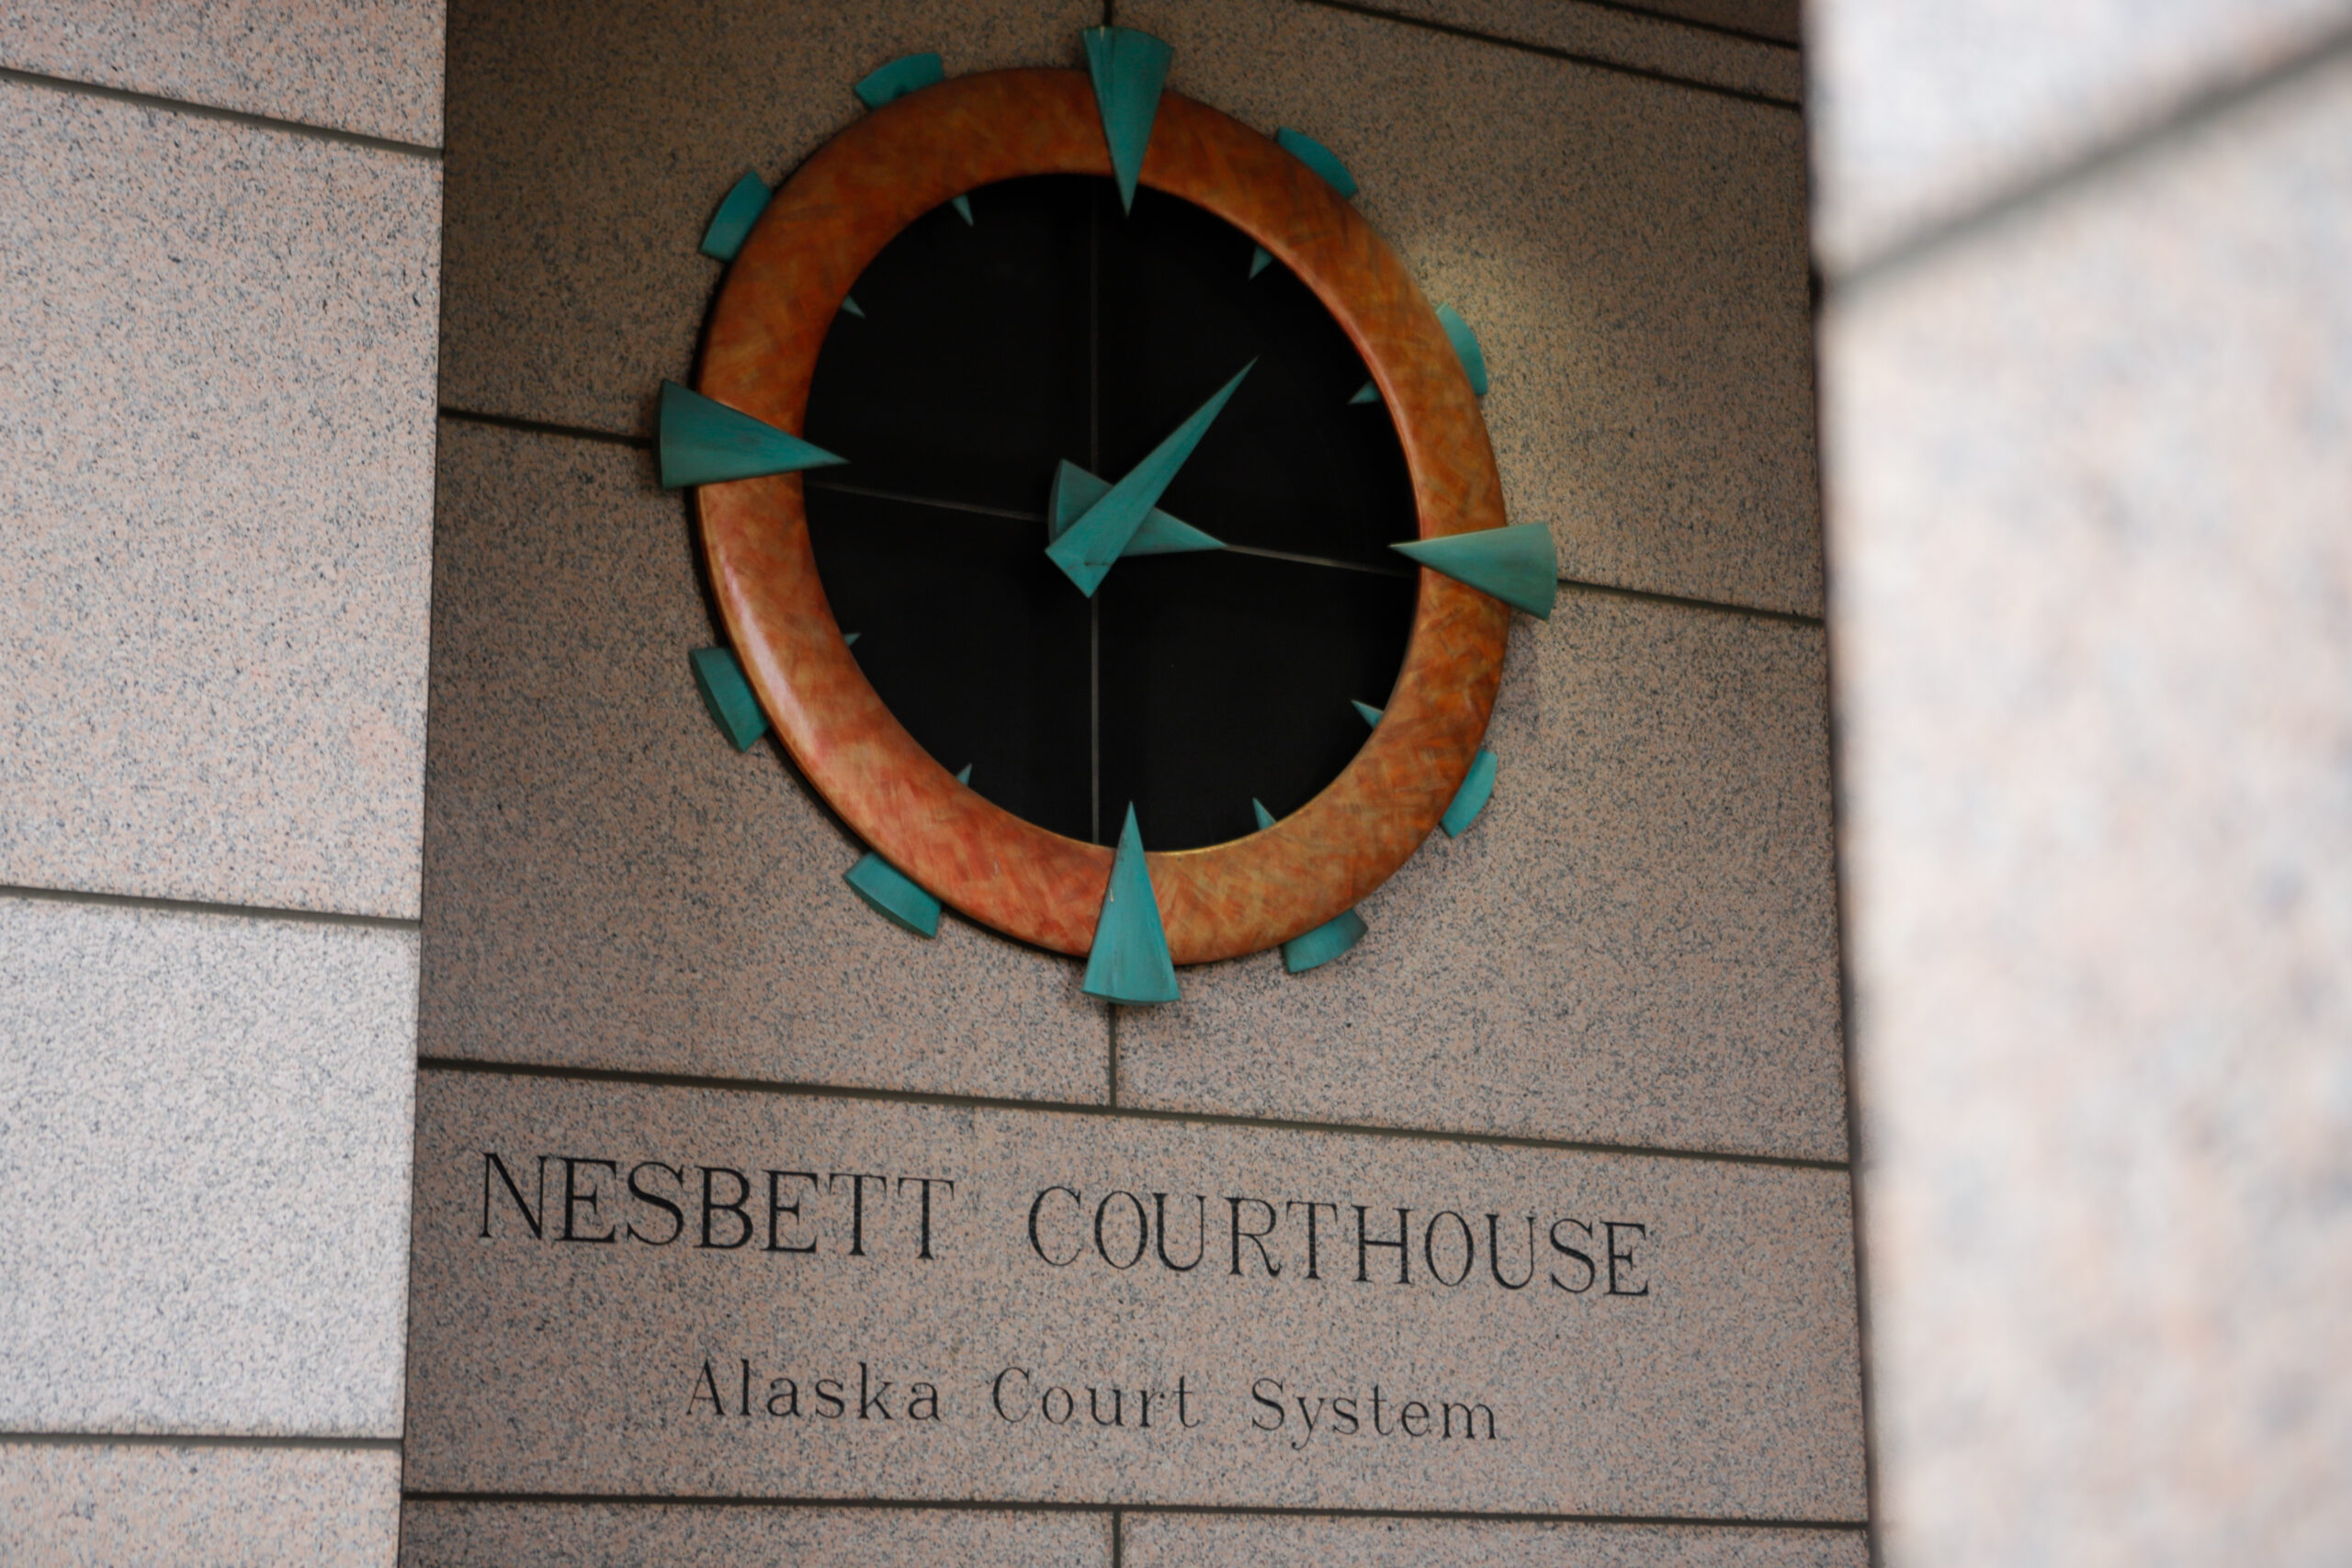 An analog clock with a black center surrounded by orange stone and with turquoise hands and hour markers reads 3:07.